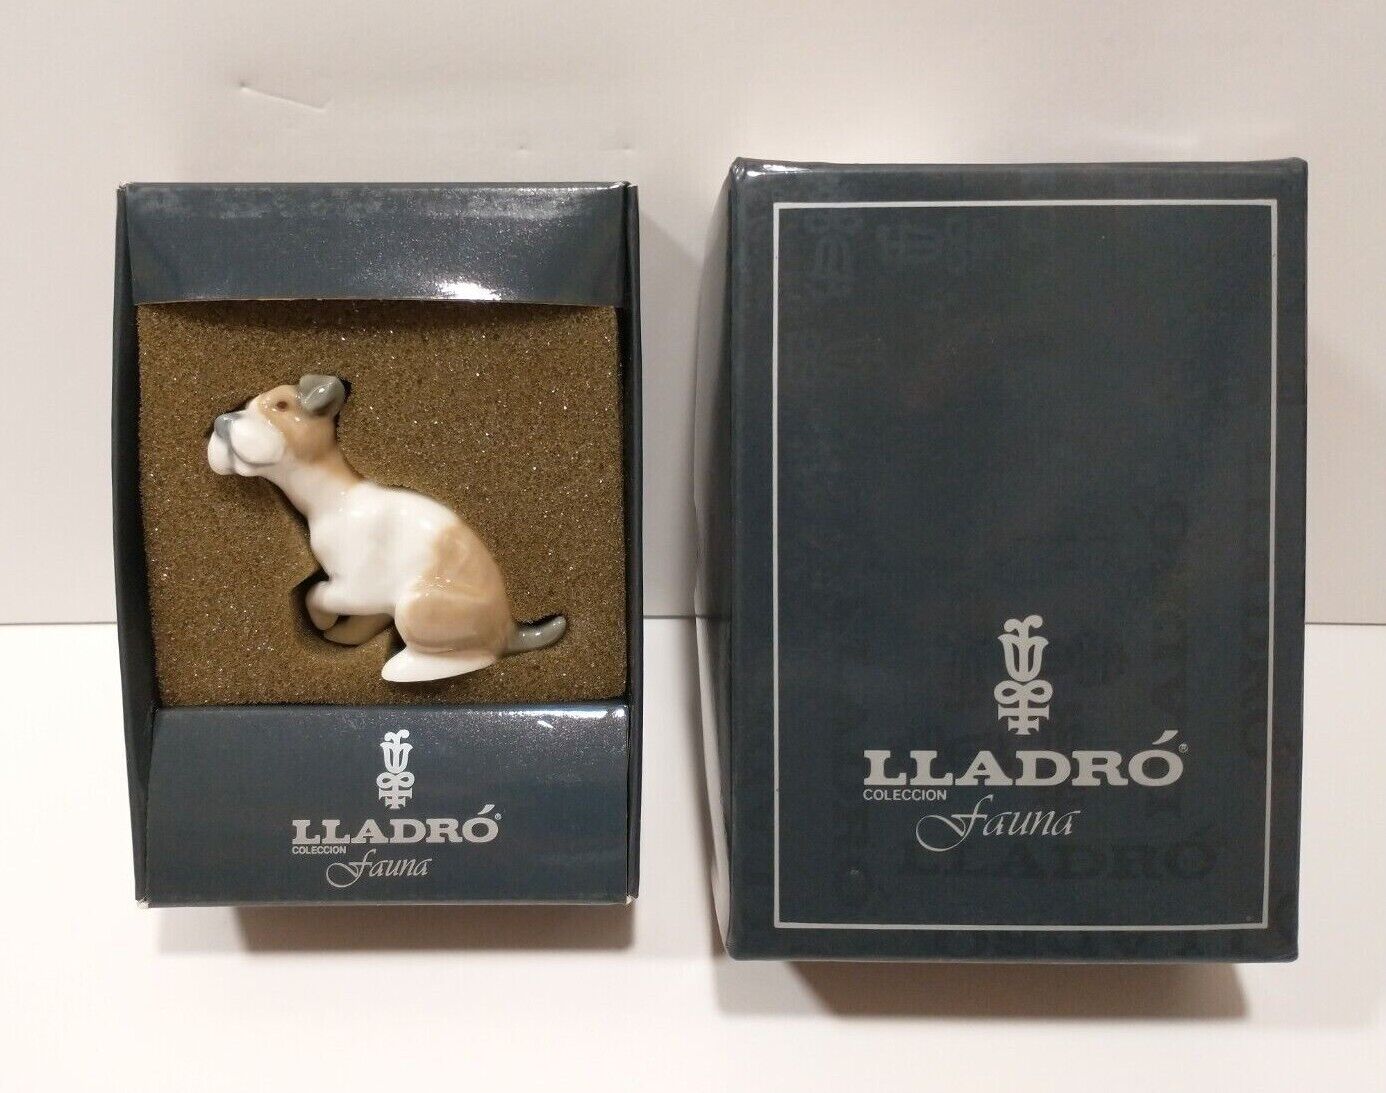 1985 LLADRO Fauna Collection MINI CURIOUS PUPPY DOG #5393 Porcelain Figure NEW